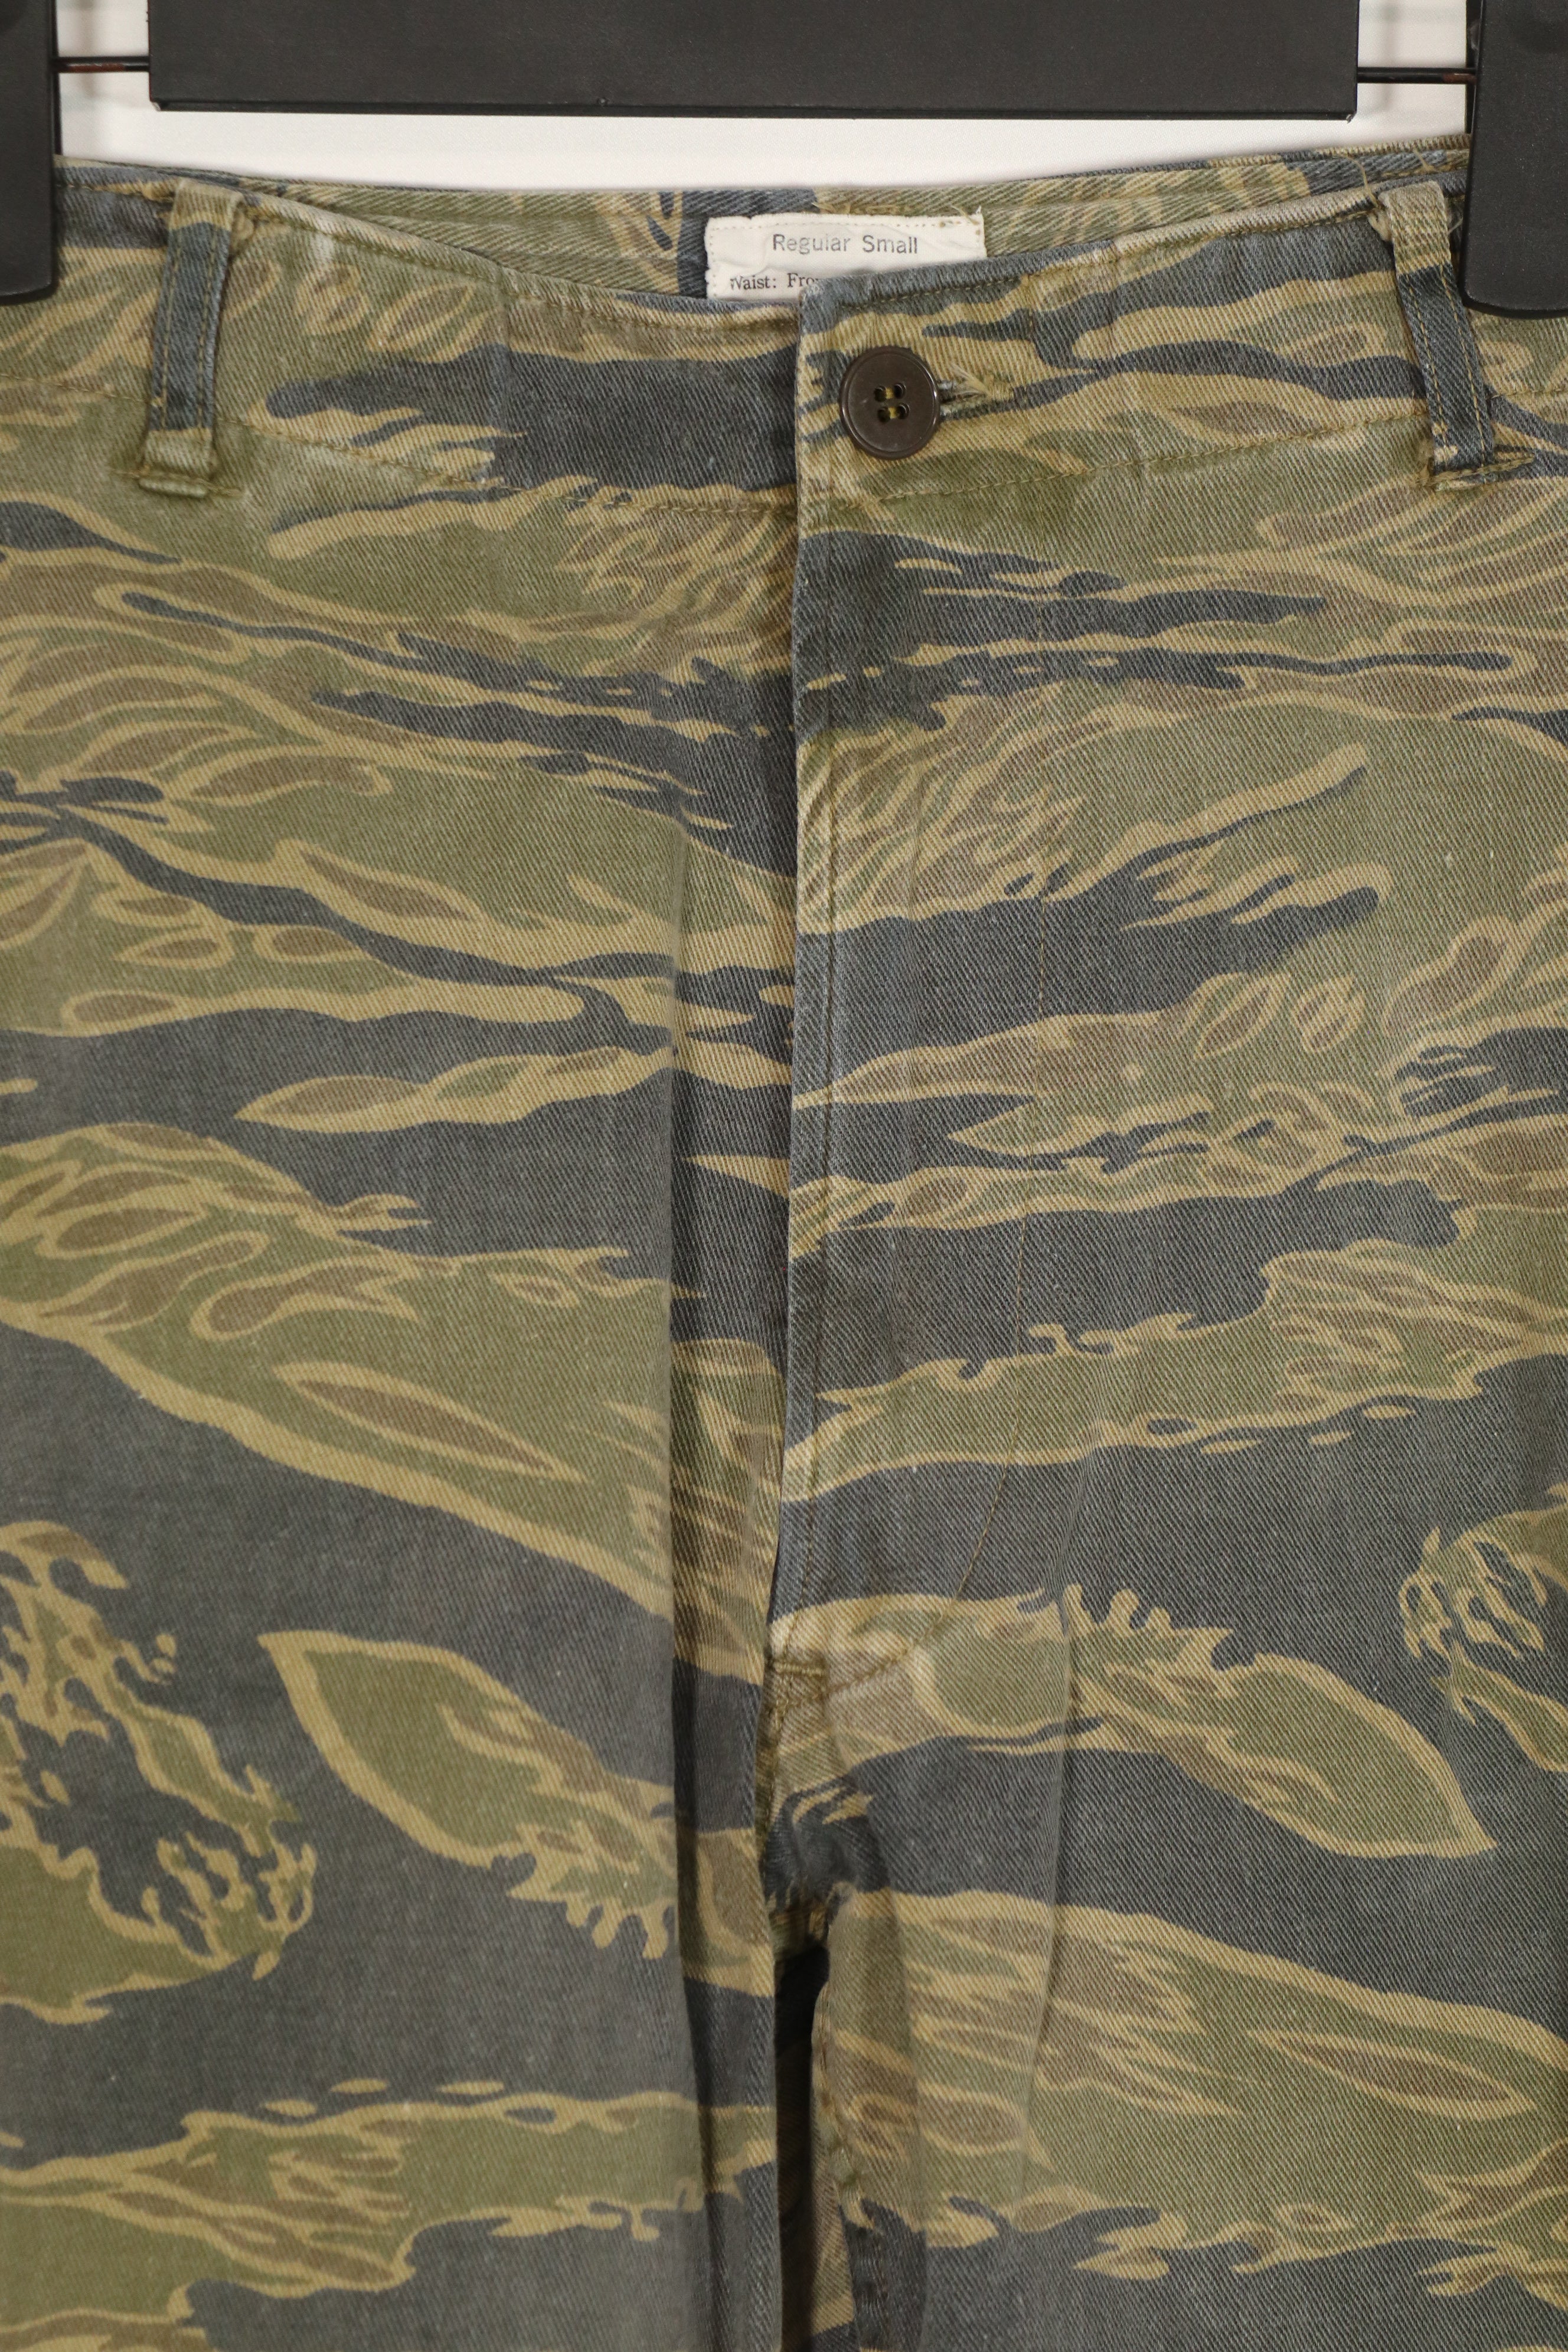 Replica Gold Tiger Stripe Pants made by MASH Osaka, US cut, faded, used.